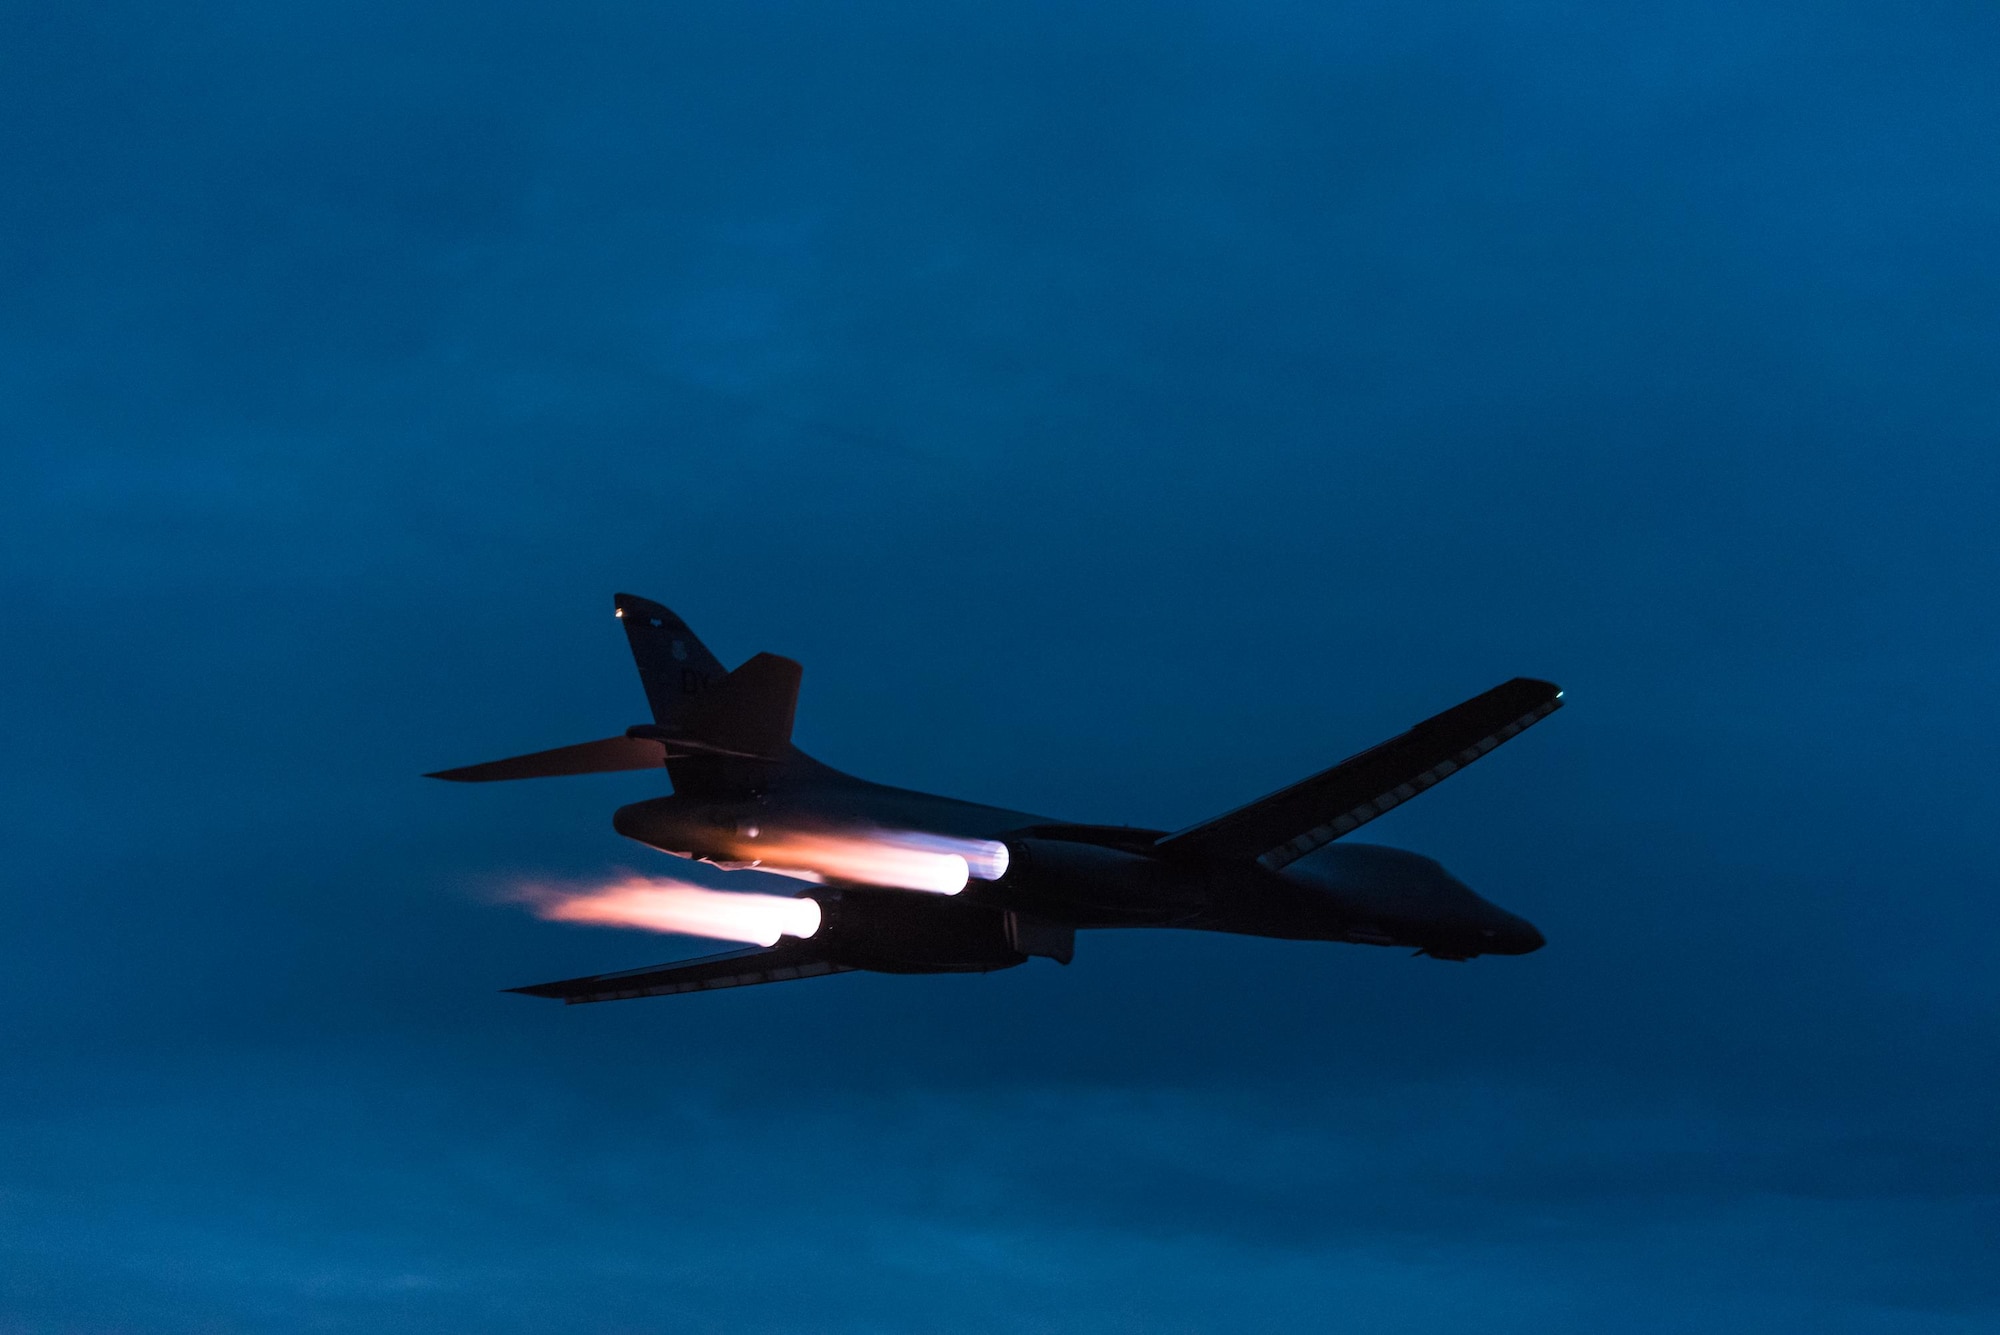 A U.S. Air Force B-1B Lancer assigned to the 9th Expeditionary Bomb Squadron, deployed from Dyess Air Force Base, Texas, takes off from Andersen Air Force Base, Guam to fly a bilateral mission with two Japan Air Self-Defense Force F-15’s over the East China Sea, July 6, 2017. This mission marks the first time U.S. Pacific Command B-1B Lancers have conducted combined training with JASDF fighters at night, demonstrating our increasing combined capabilities. (U.S. Air Force photo by Airman 1st Class Jacob Skovo)